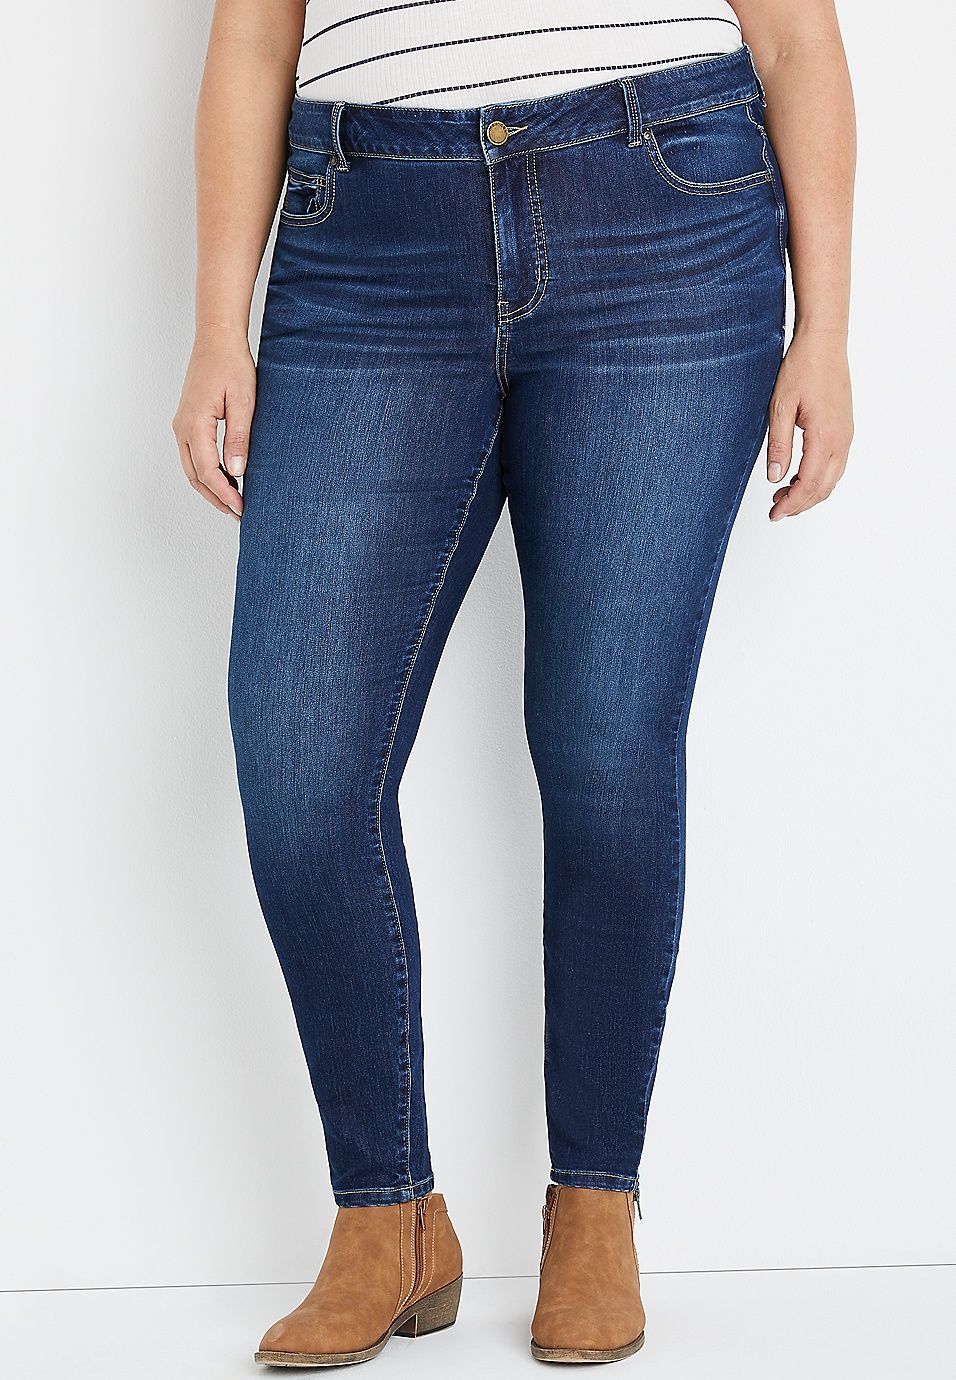 Plus Size m jeans by maurices™ Everflex™ Super Skinny Mid Fit Mid Rise Jean | Maurices